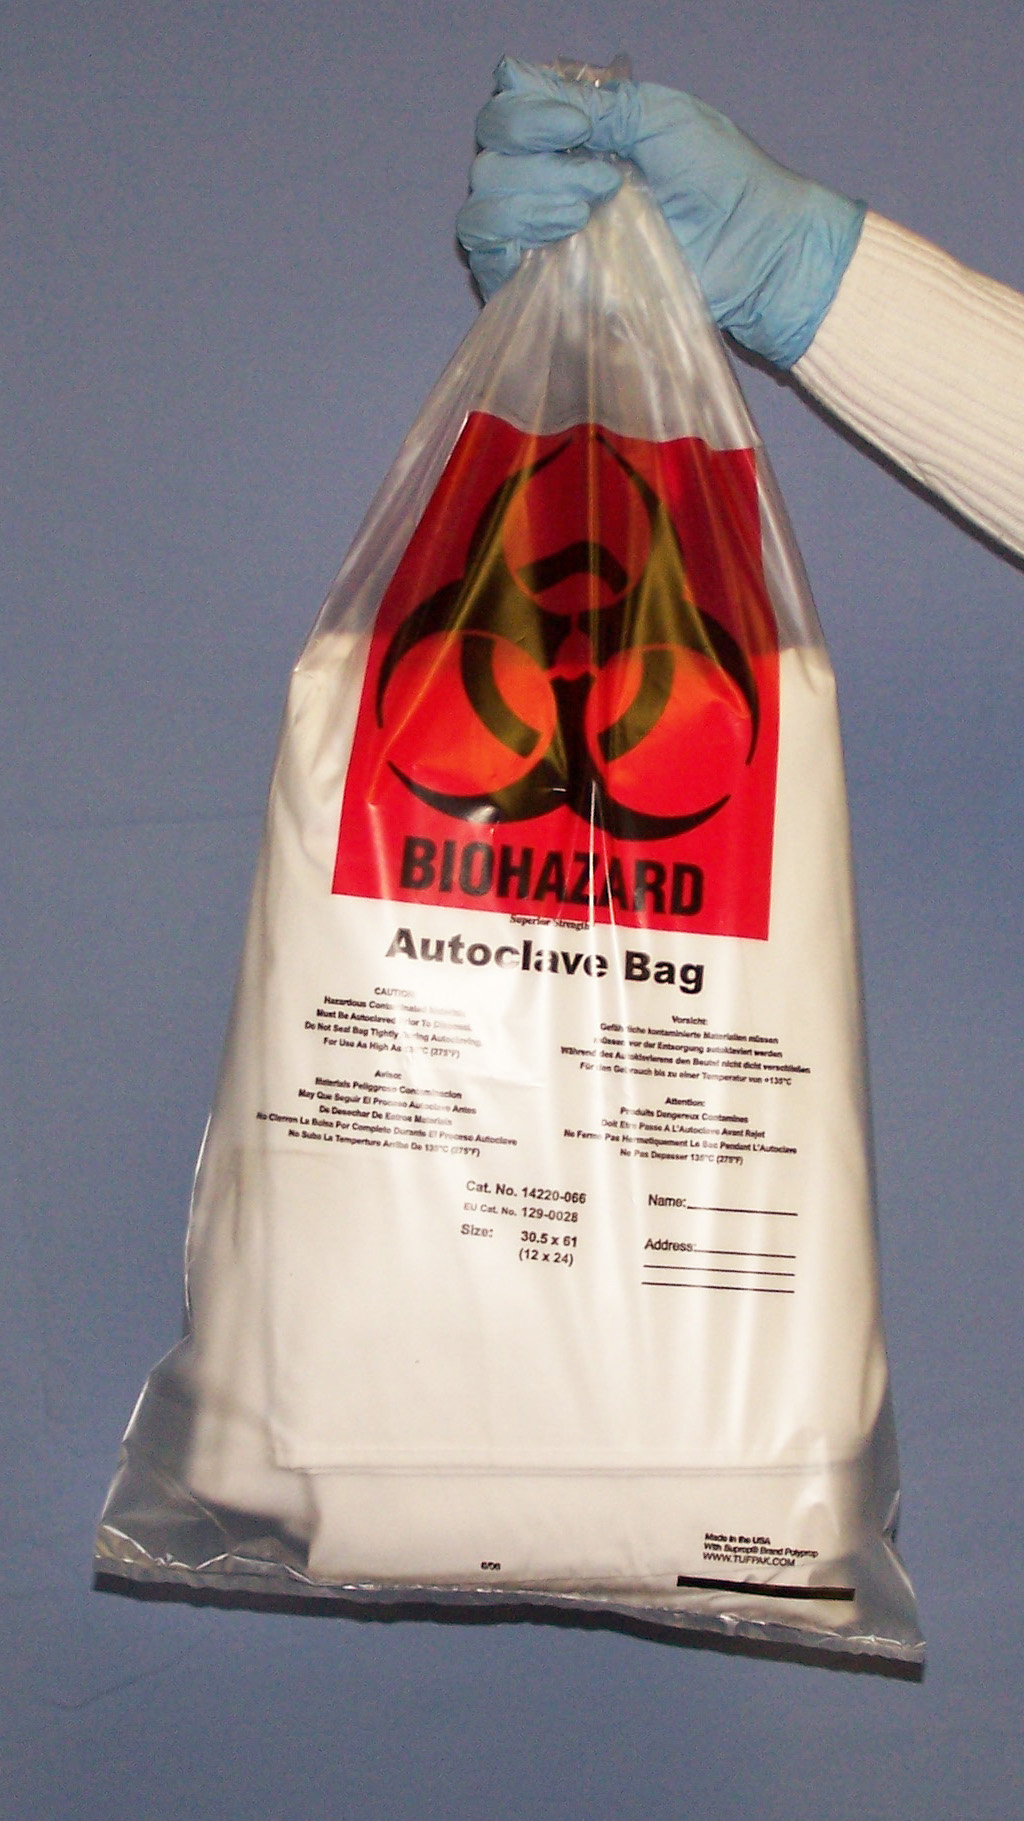 BIOHAZARD AUTOCLAVE BAGS 8X12 IN. CLEAR PP